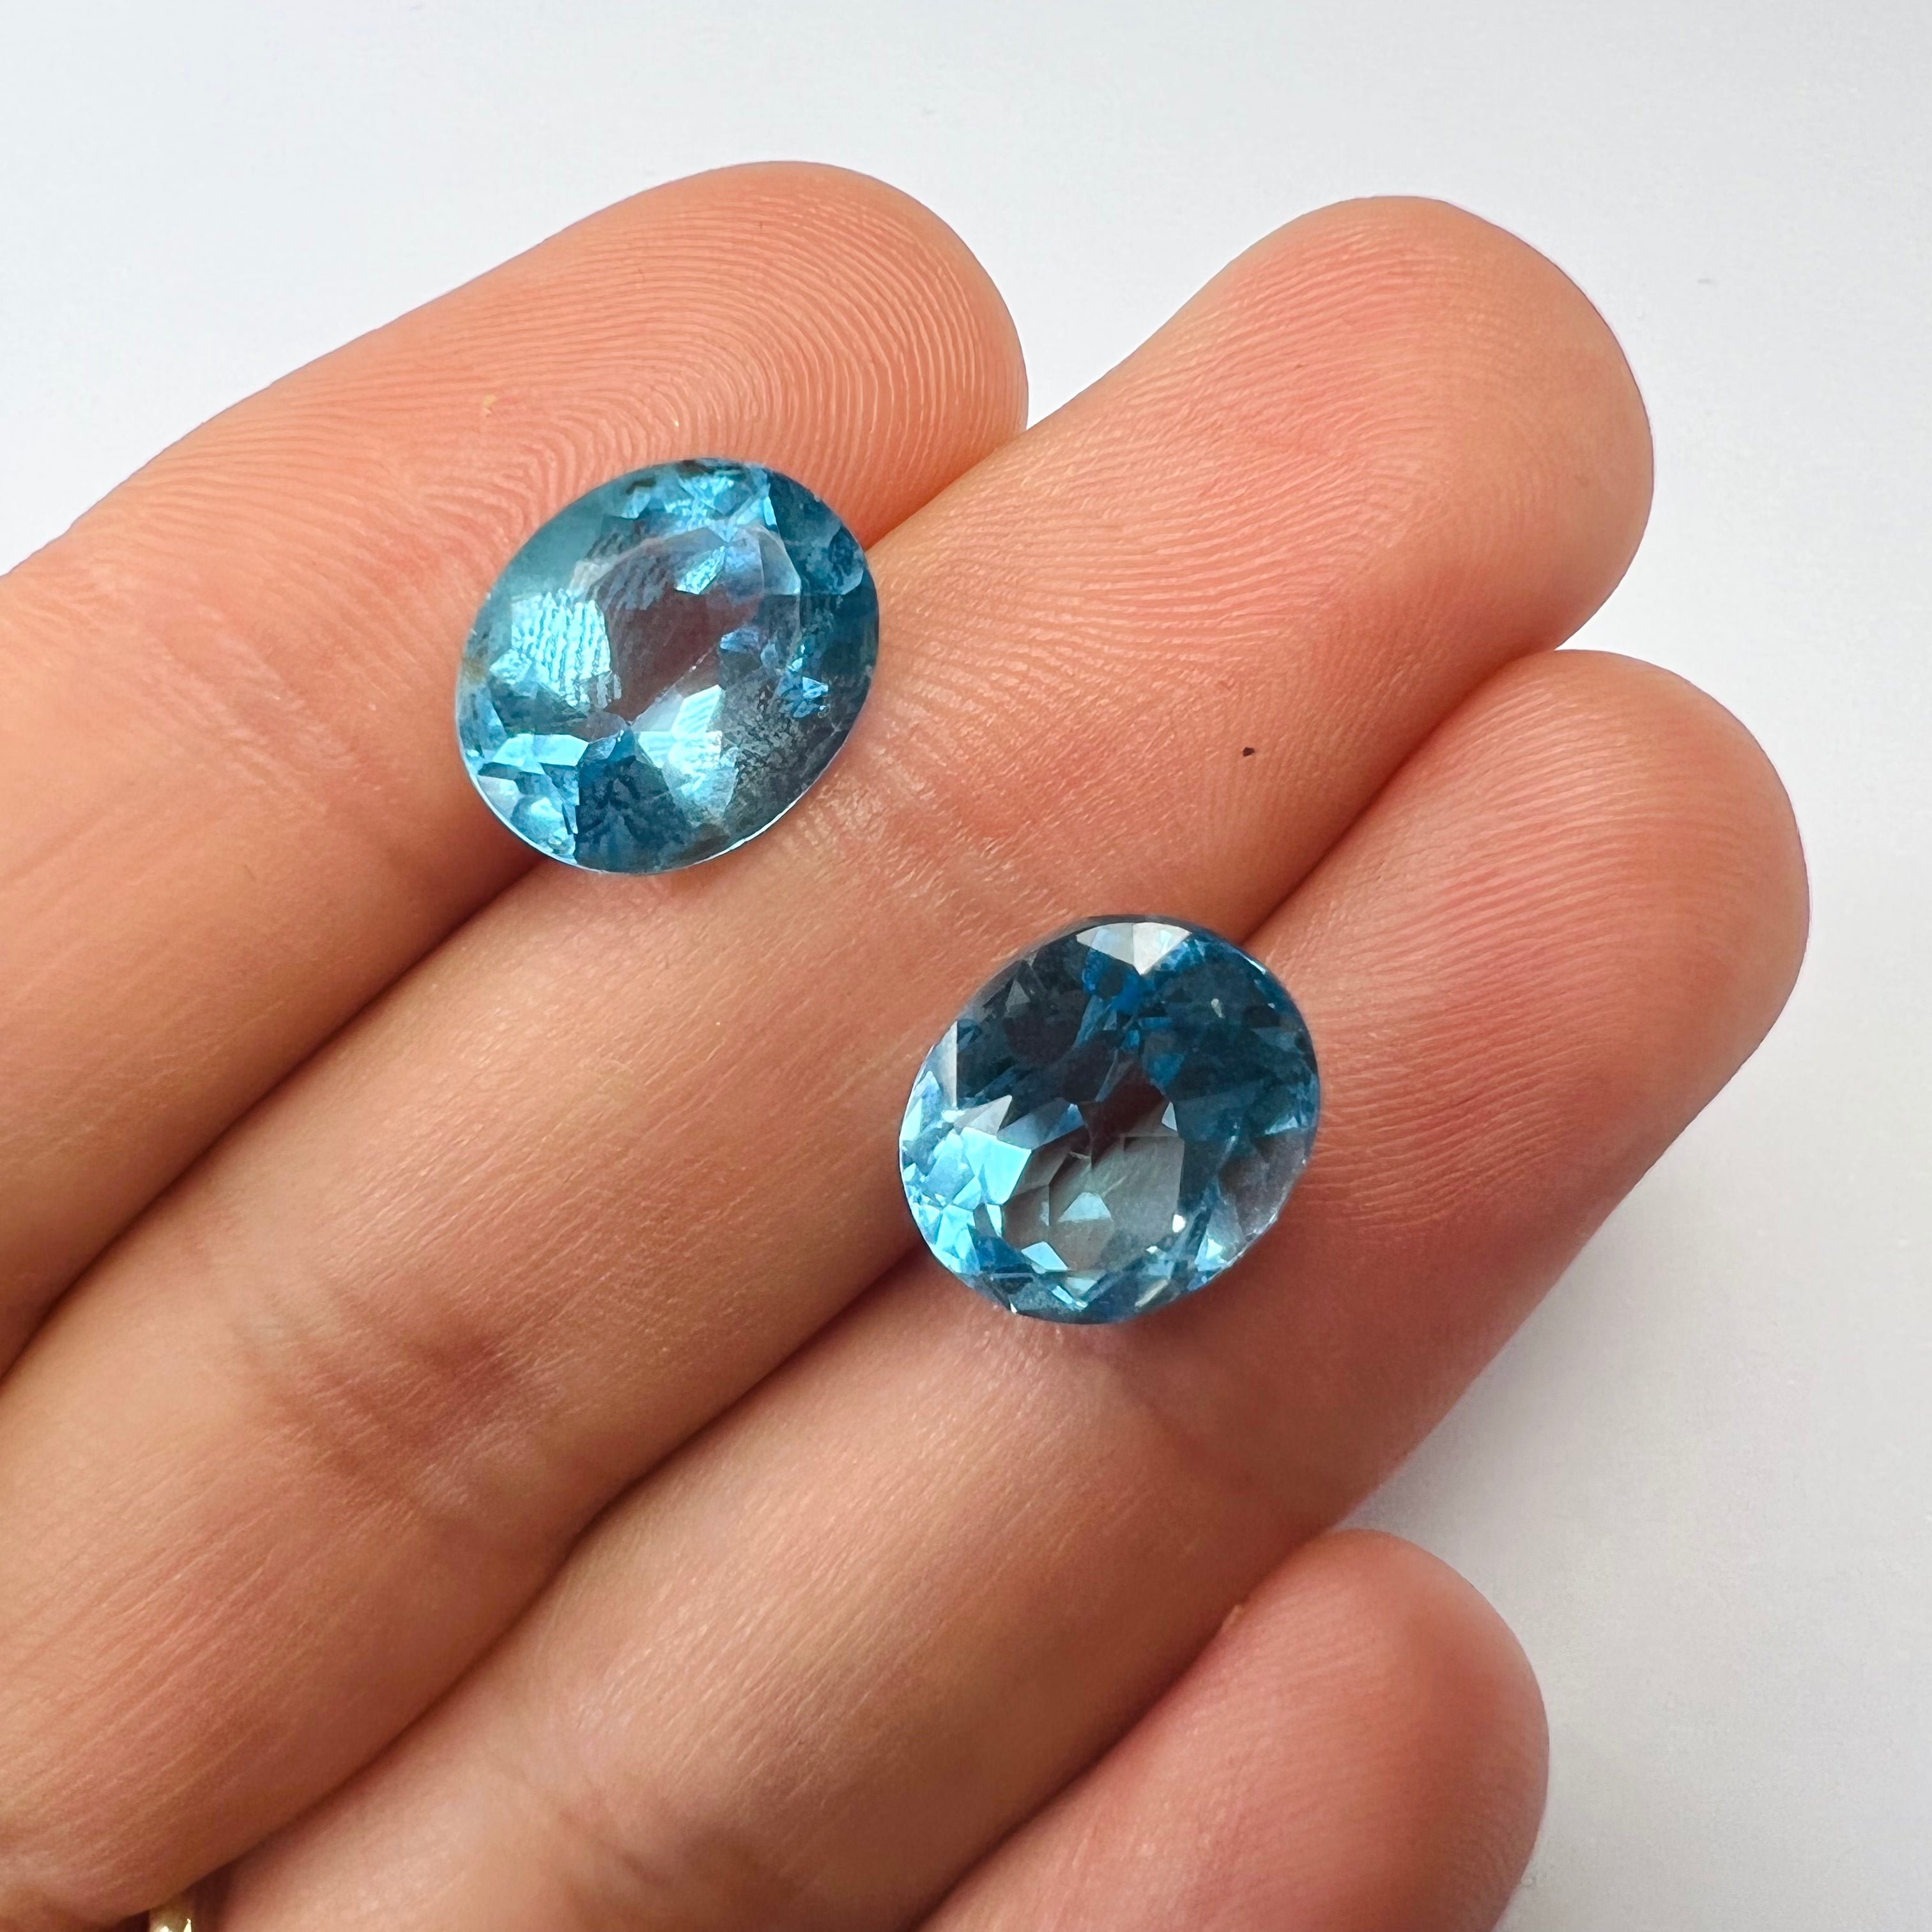 12.44CTW Pair of Loose Natural Oval Cut Topaz 12x9x6.9mm Earth mined Gemstone